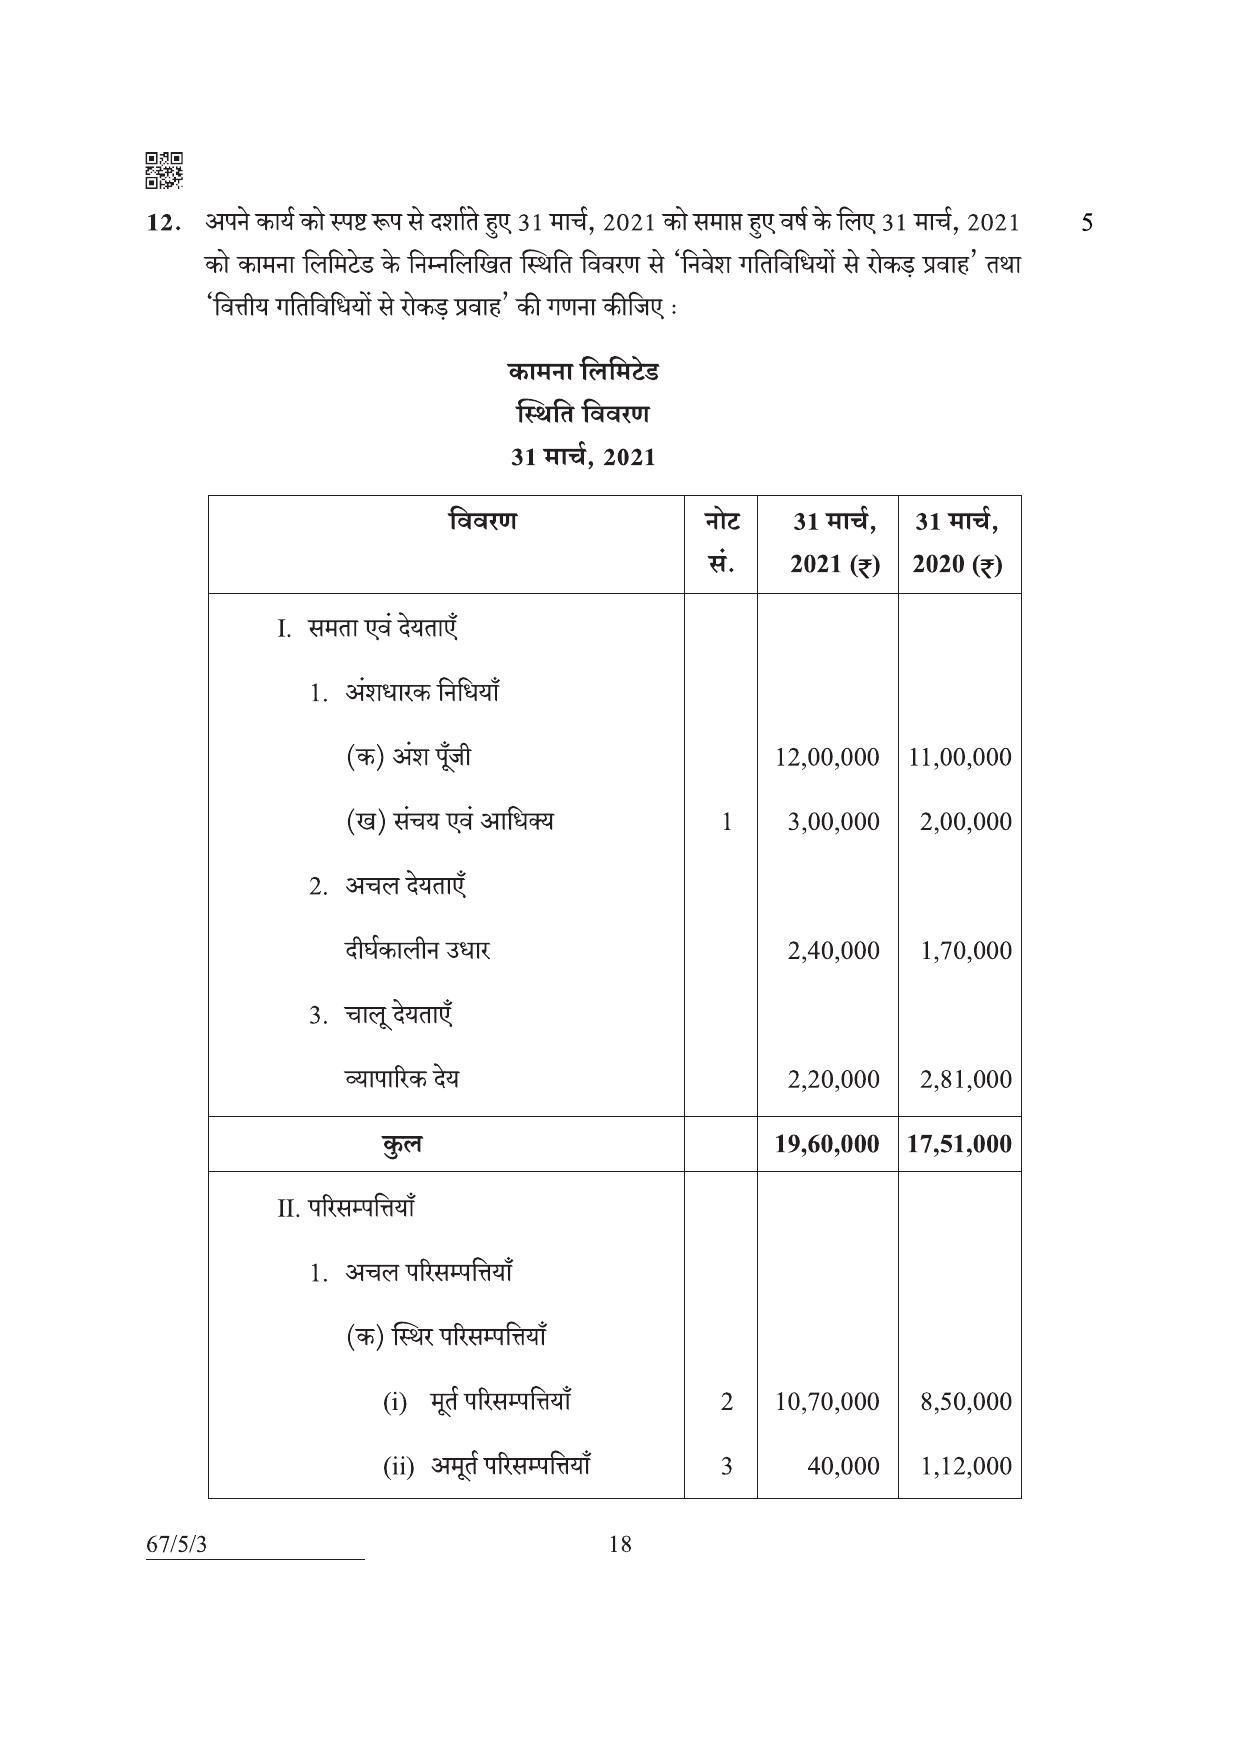 CBSE Class 12 67-5-3 Accountancy 2022 Question Paper - Page 18